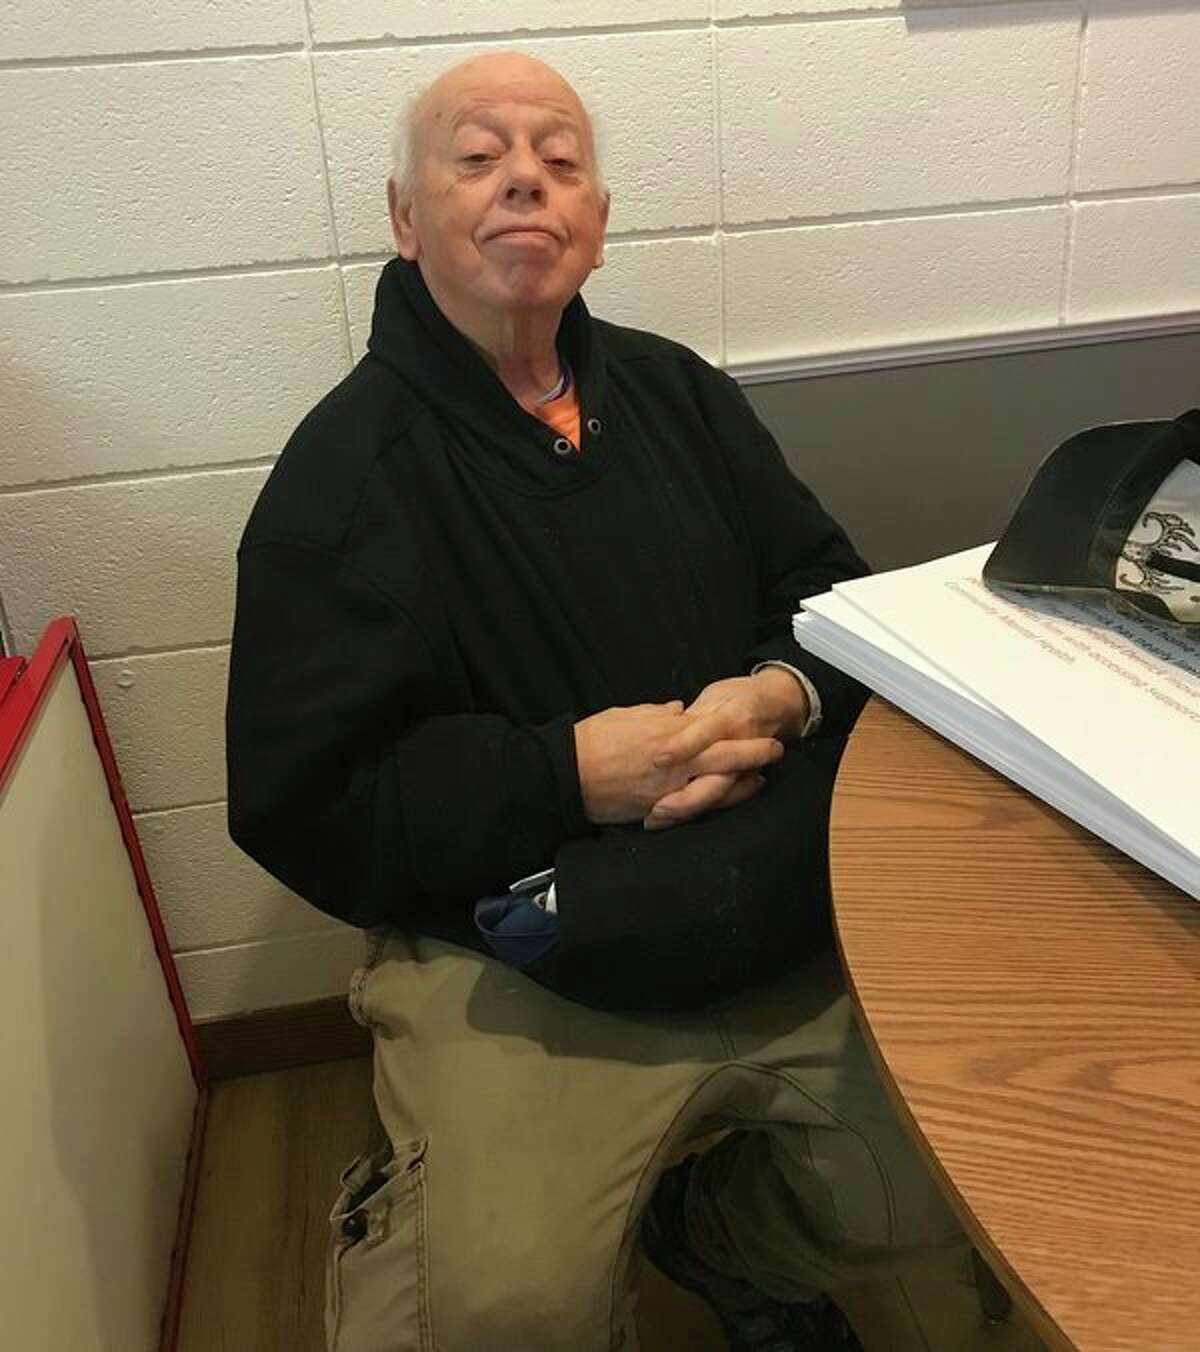 Melvin Fisher wears technology that could help local him in times of need through The Arc of Midland. (Photo provided)